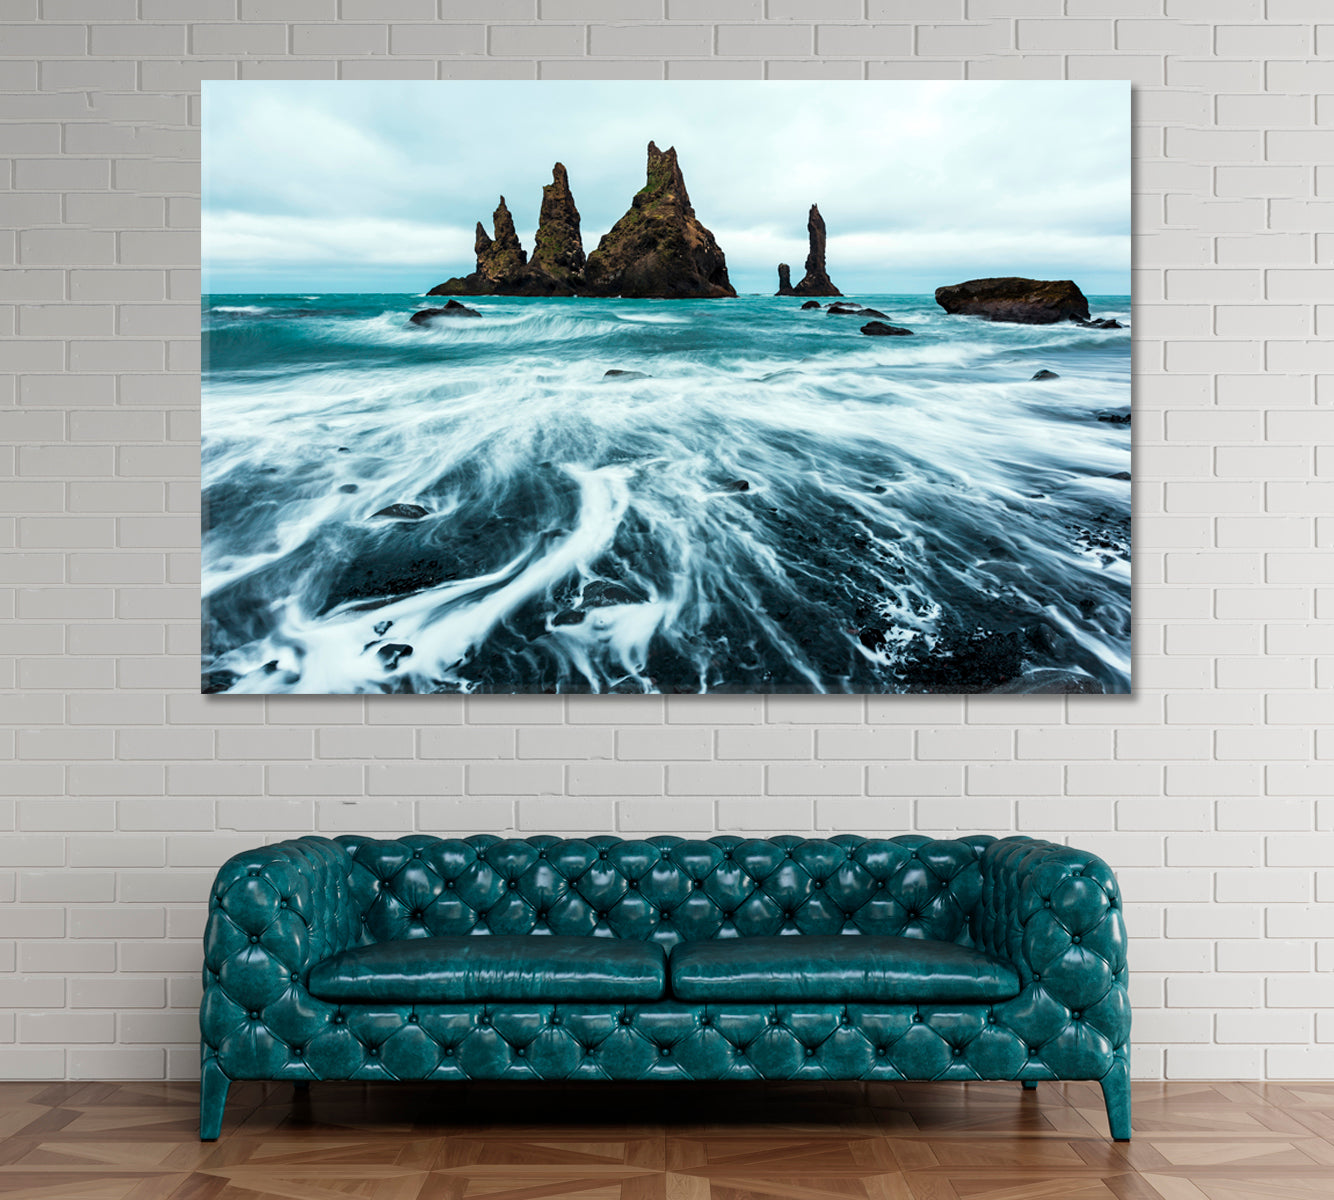 Rock Troll Toes Iceland Canvas Print ArtLexy 1 Panel 24"x16" inches 